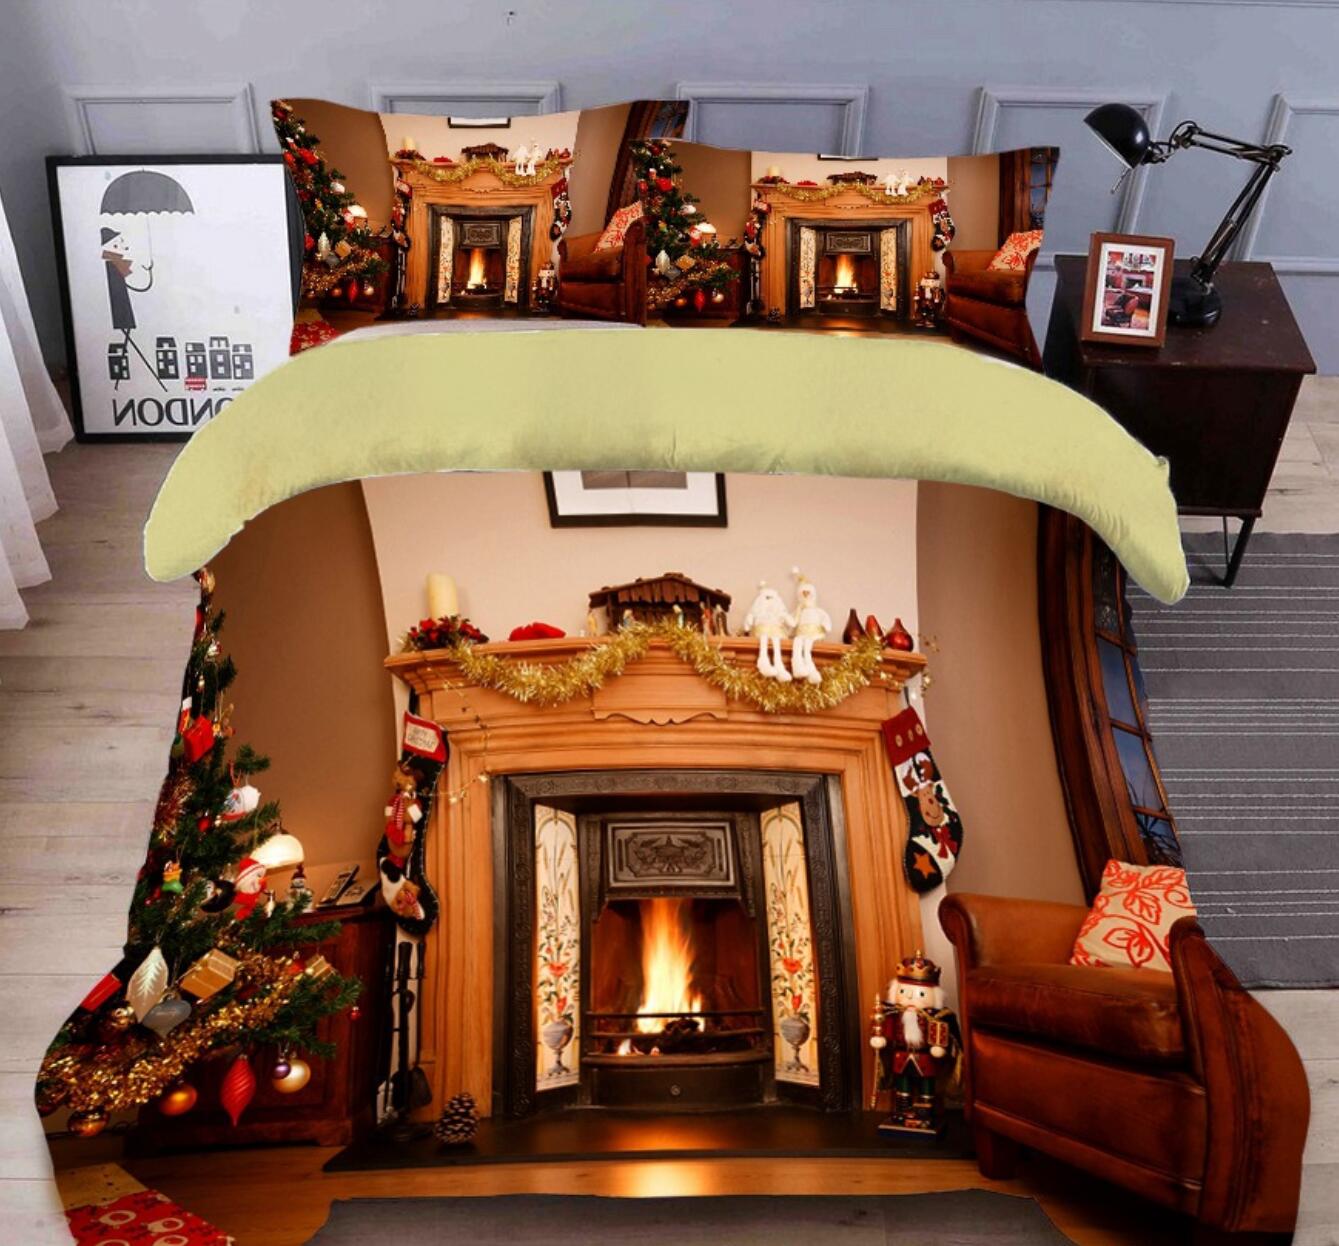 3D Fireplace 31231 Christmas Quilt Duvet Cover Xmas Bed Pillowcases